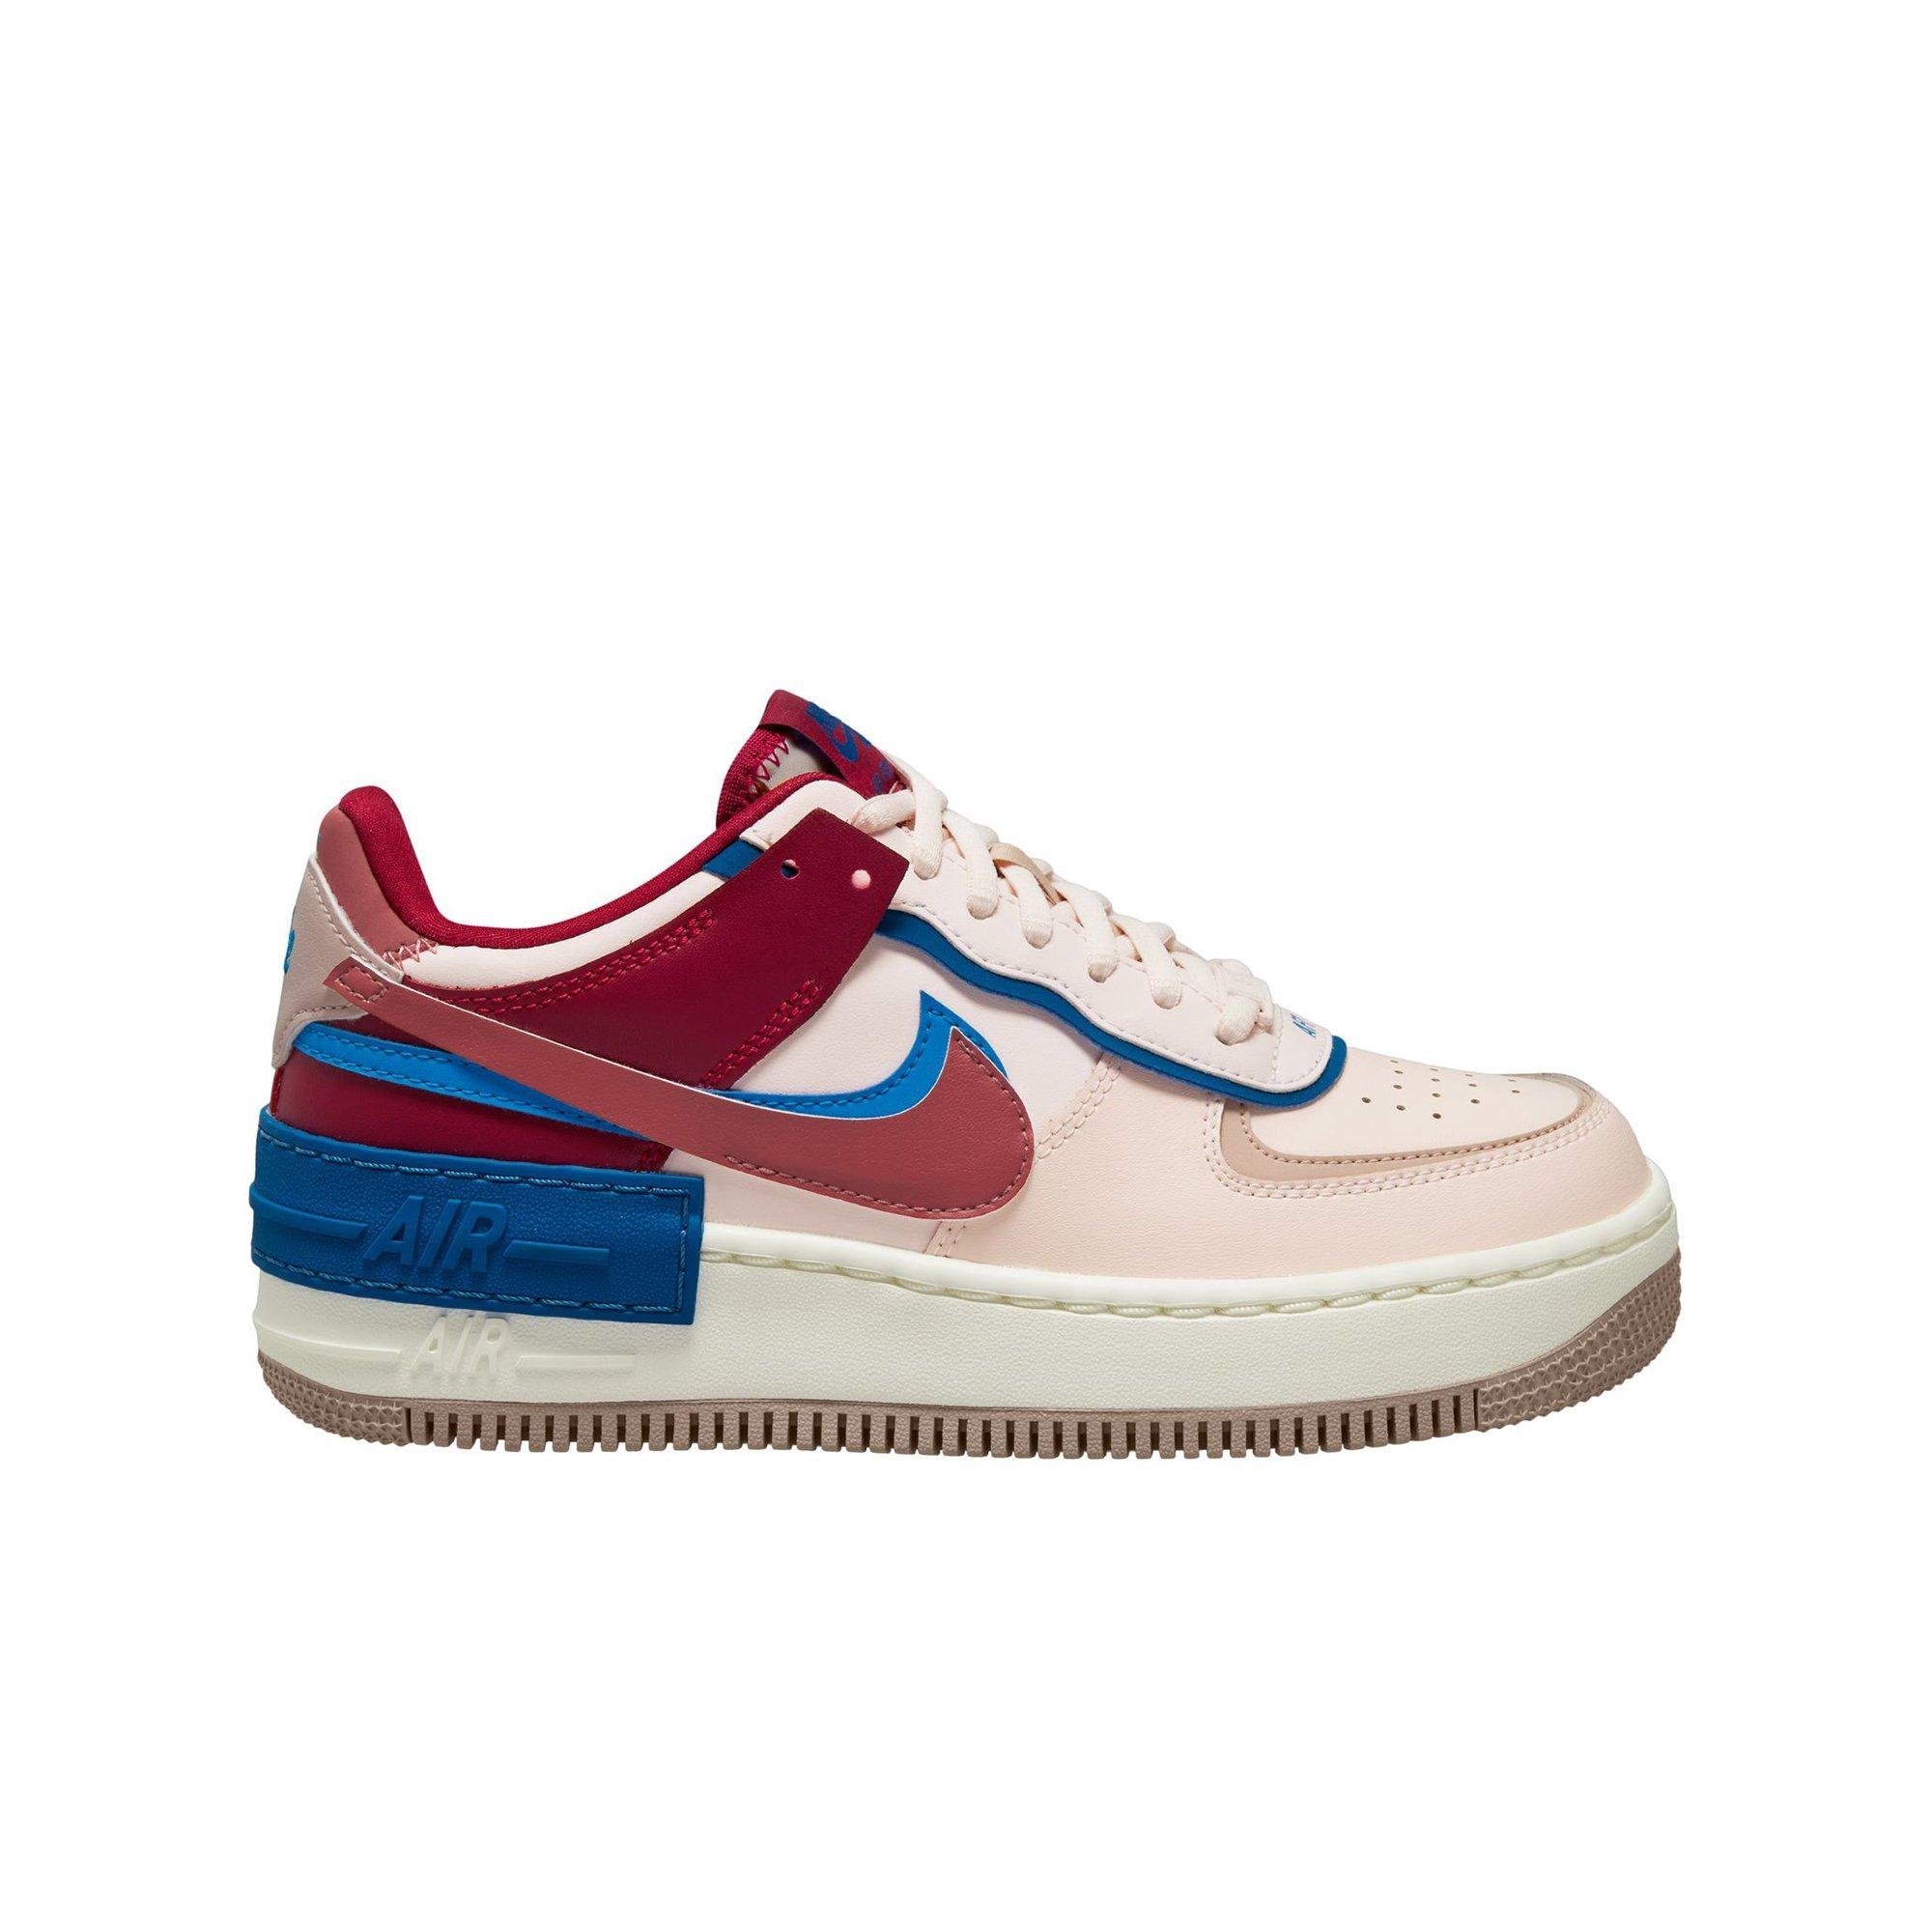 Nike Air Force 1 Shadow Women's Shoes Size - 9.5 Light Soft Pink/Canyon Rust